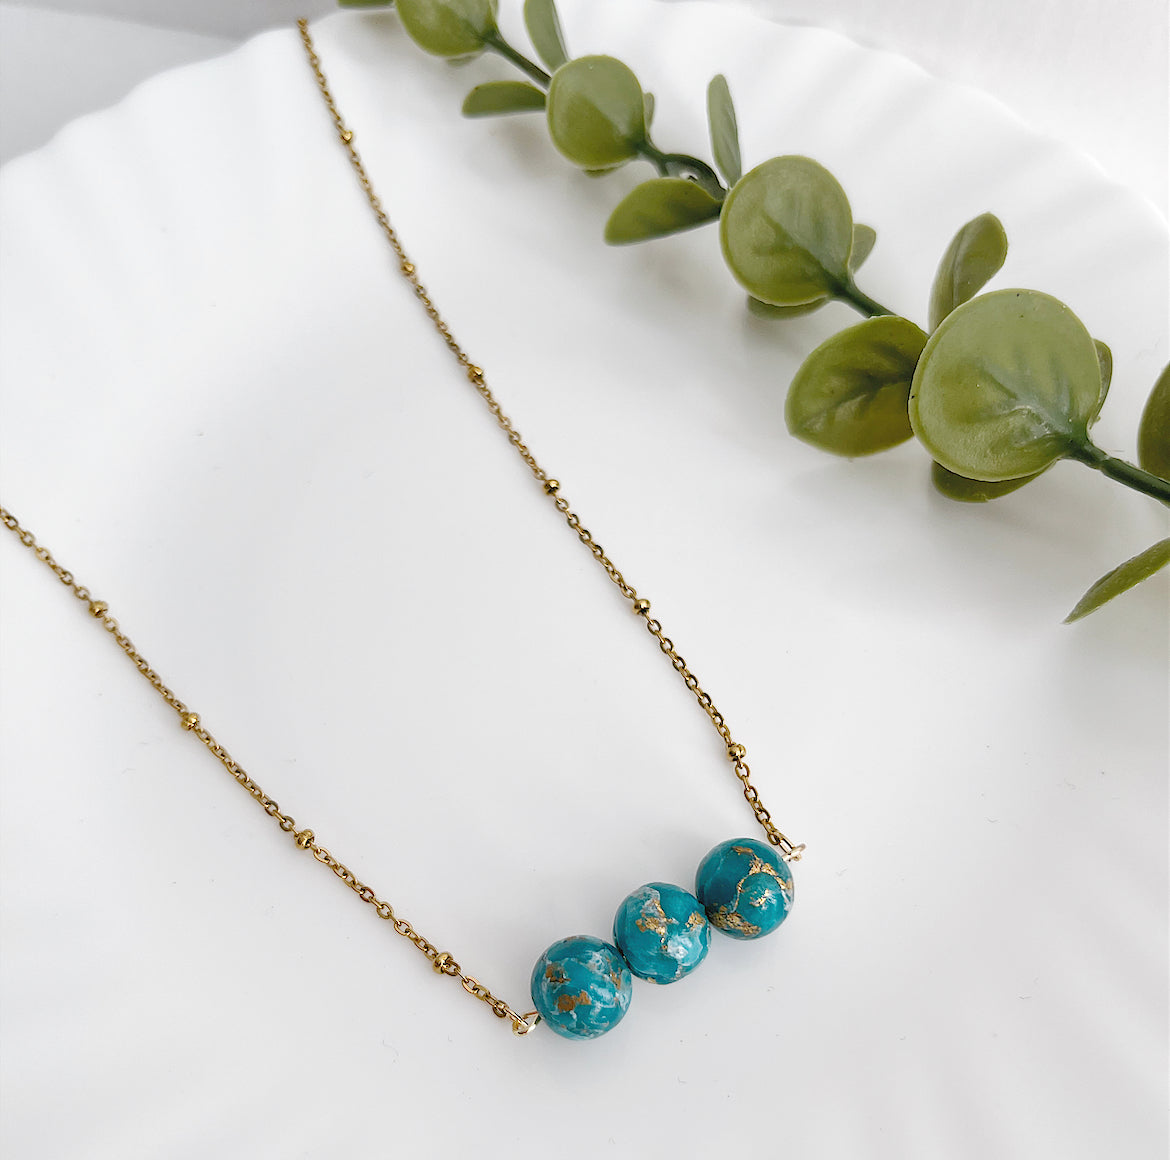 3 Beads Necklace in Blue